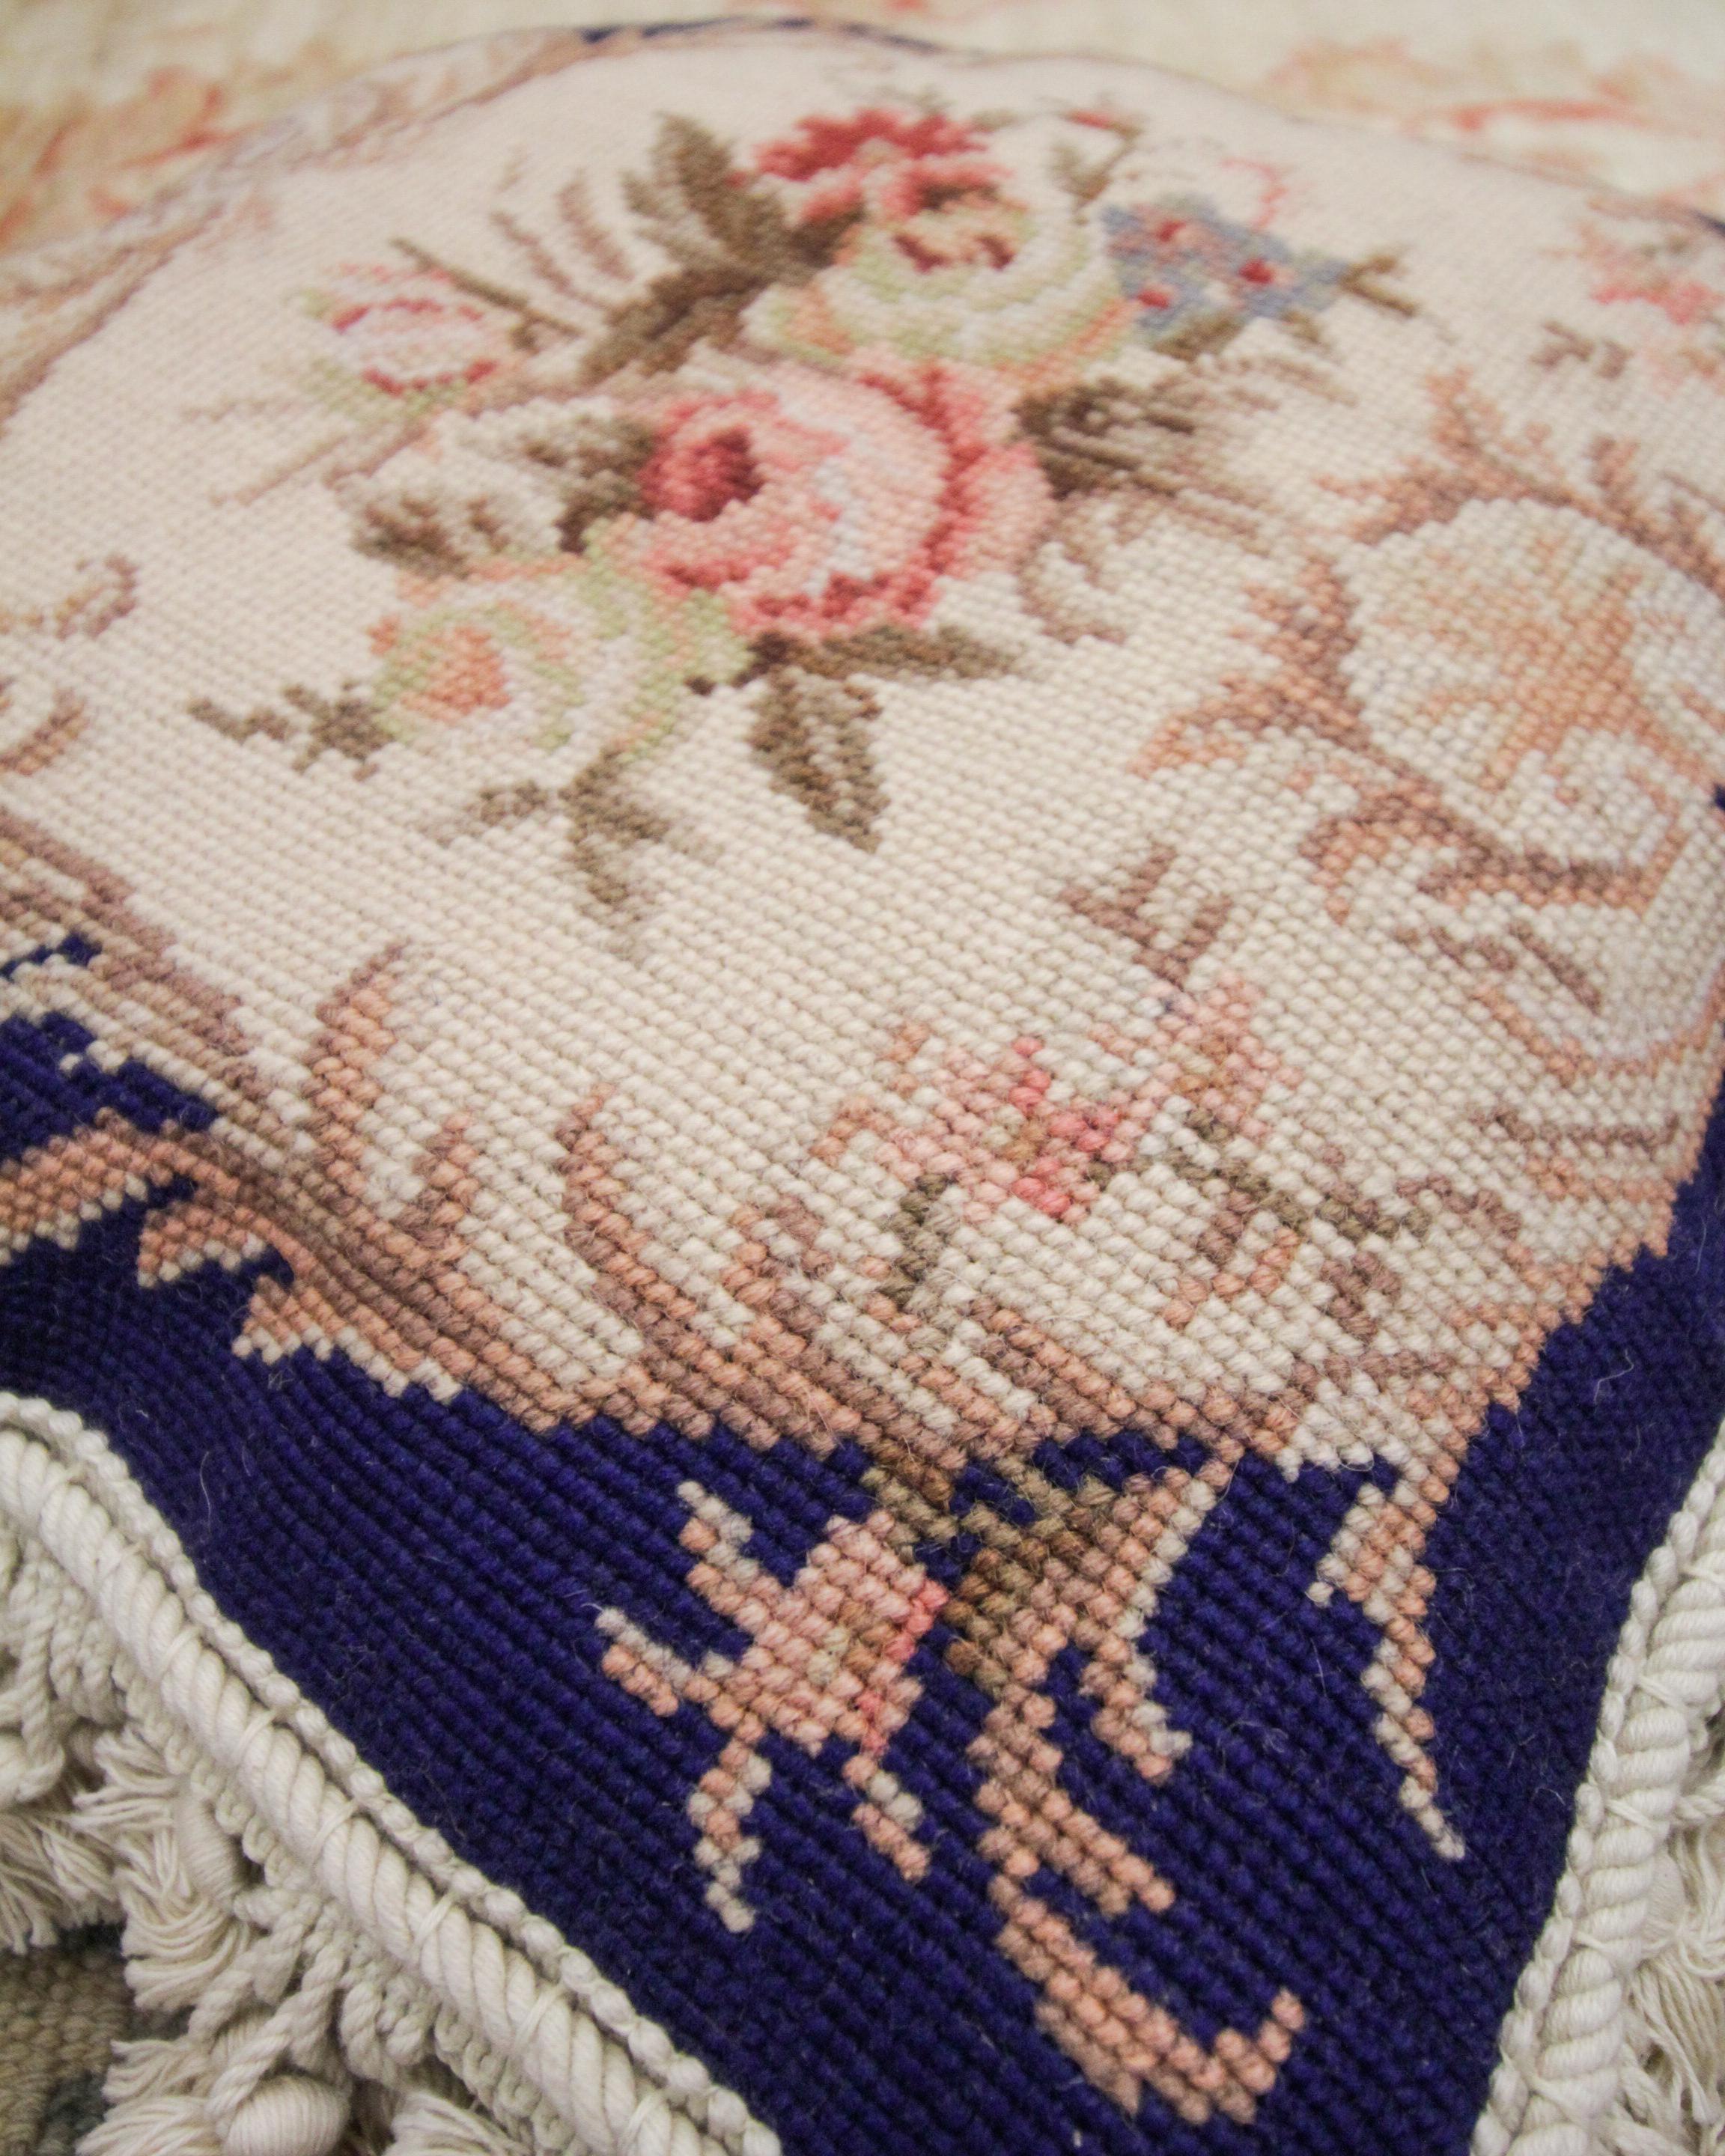 Needlework Vintage Cushion Cover Deep Blue Floral Pillow Case Sofa Armchair Scatter